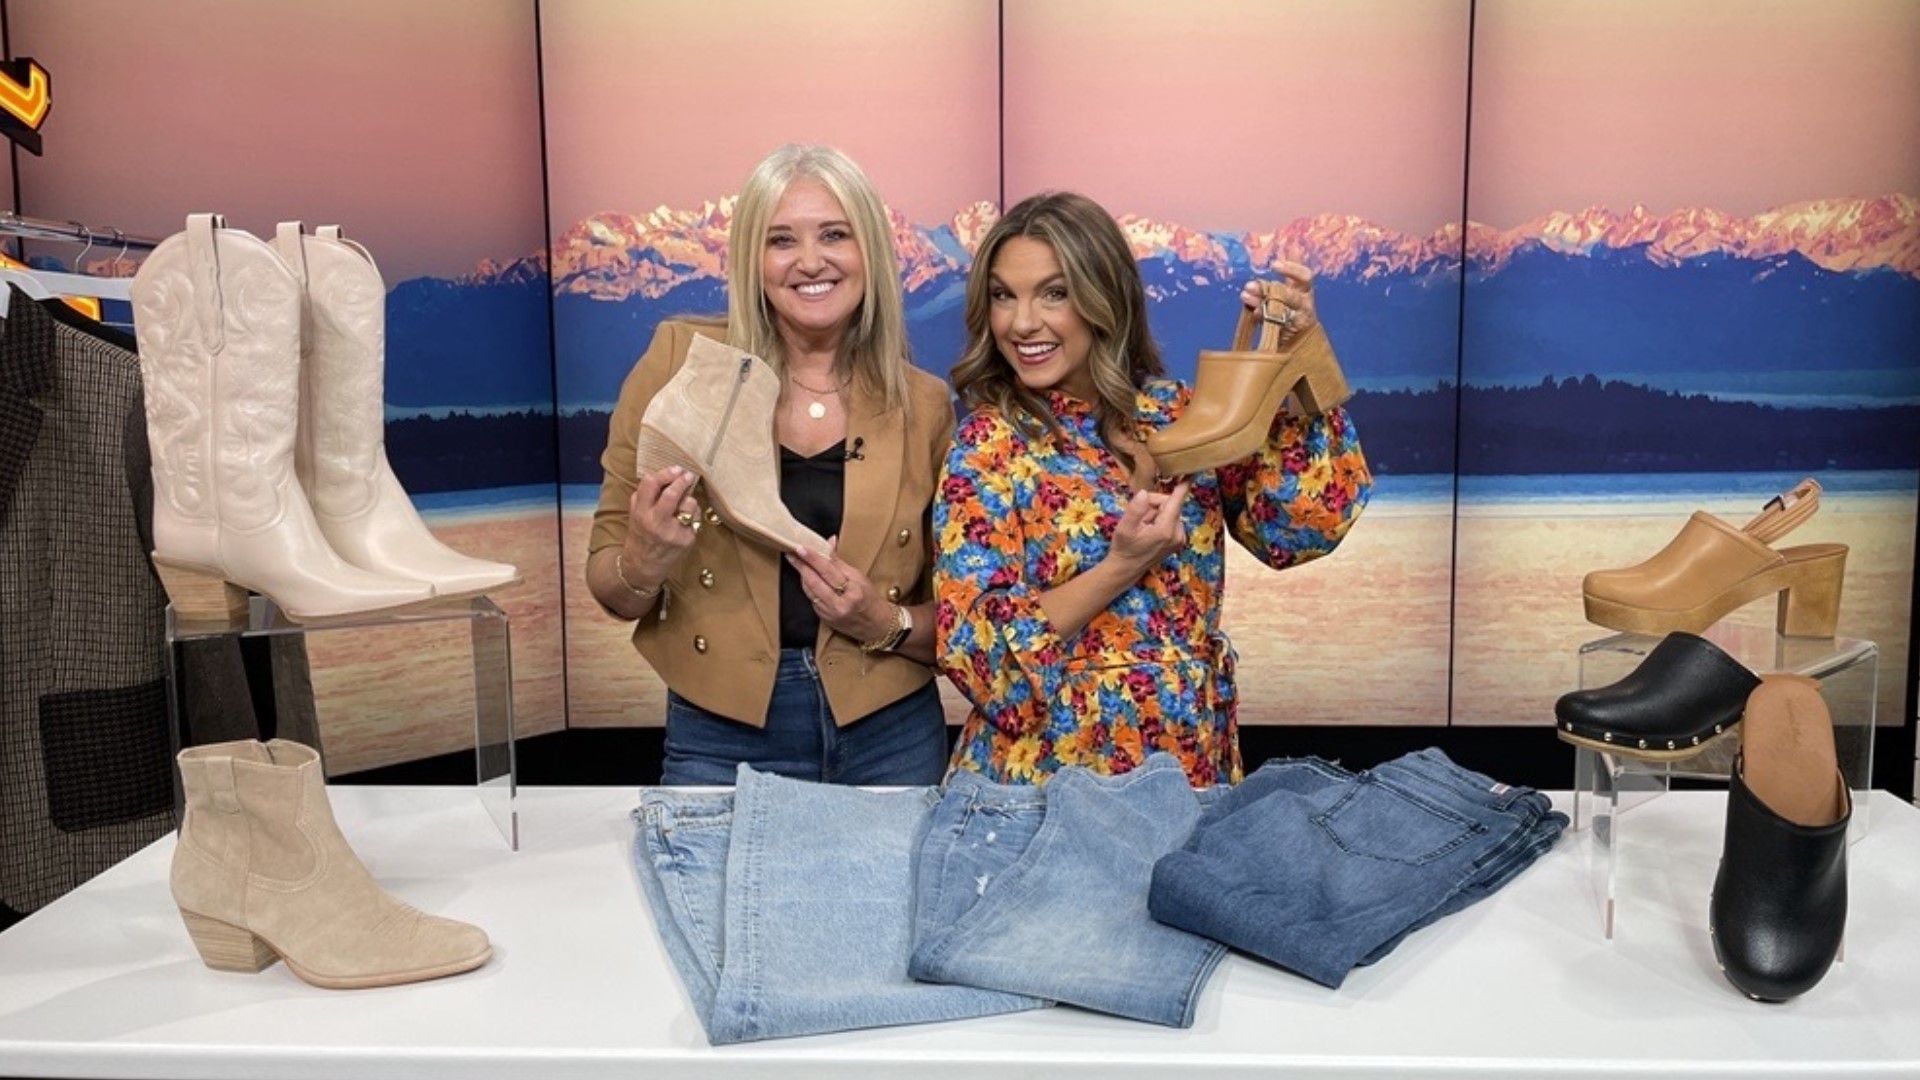 Fashion blogger Dawn Parsons says that besides clogs, oversized blazers and updated cargo pants are all in for fall! #newdaynw